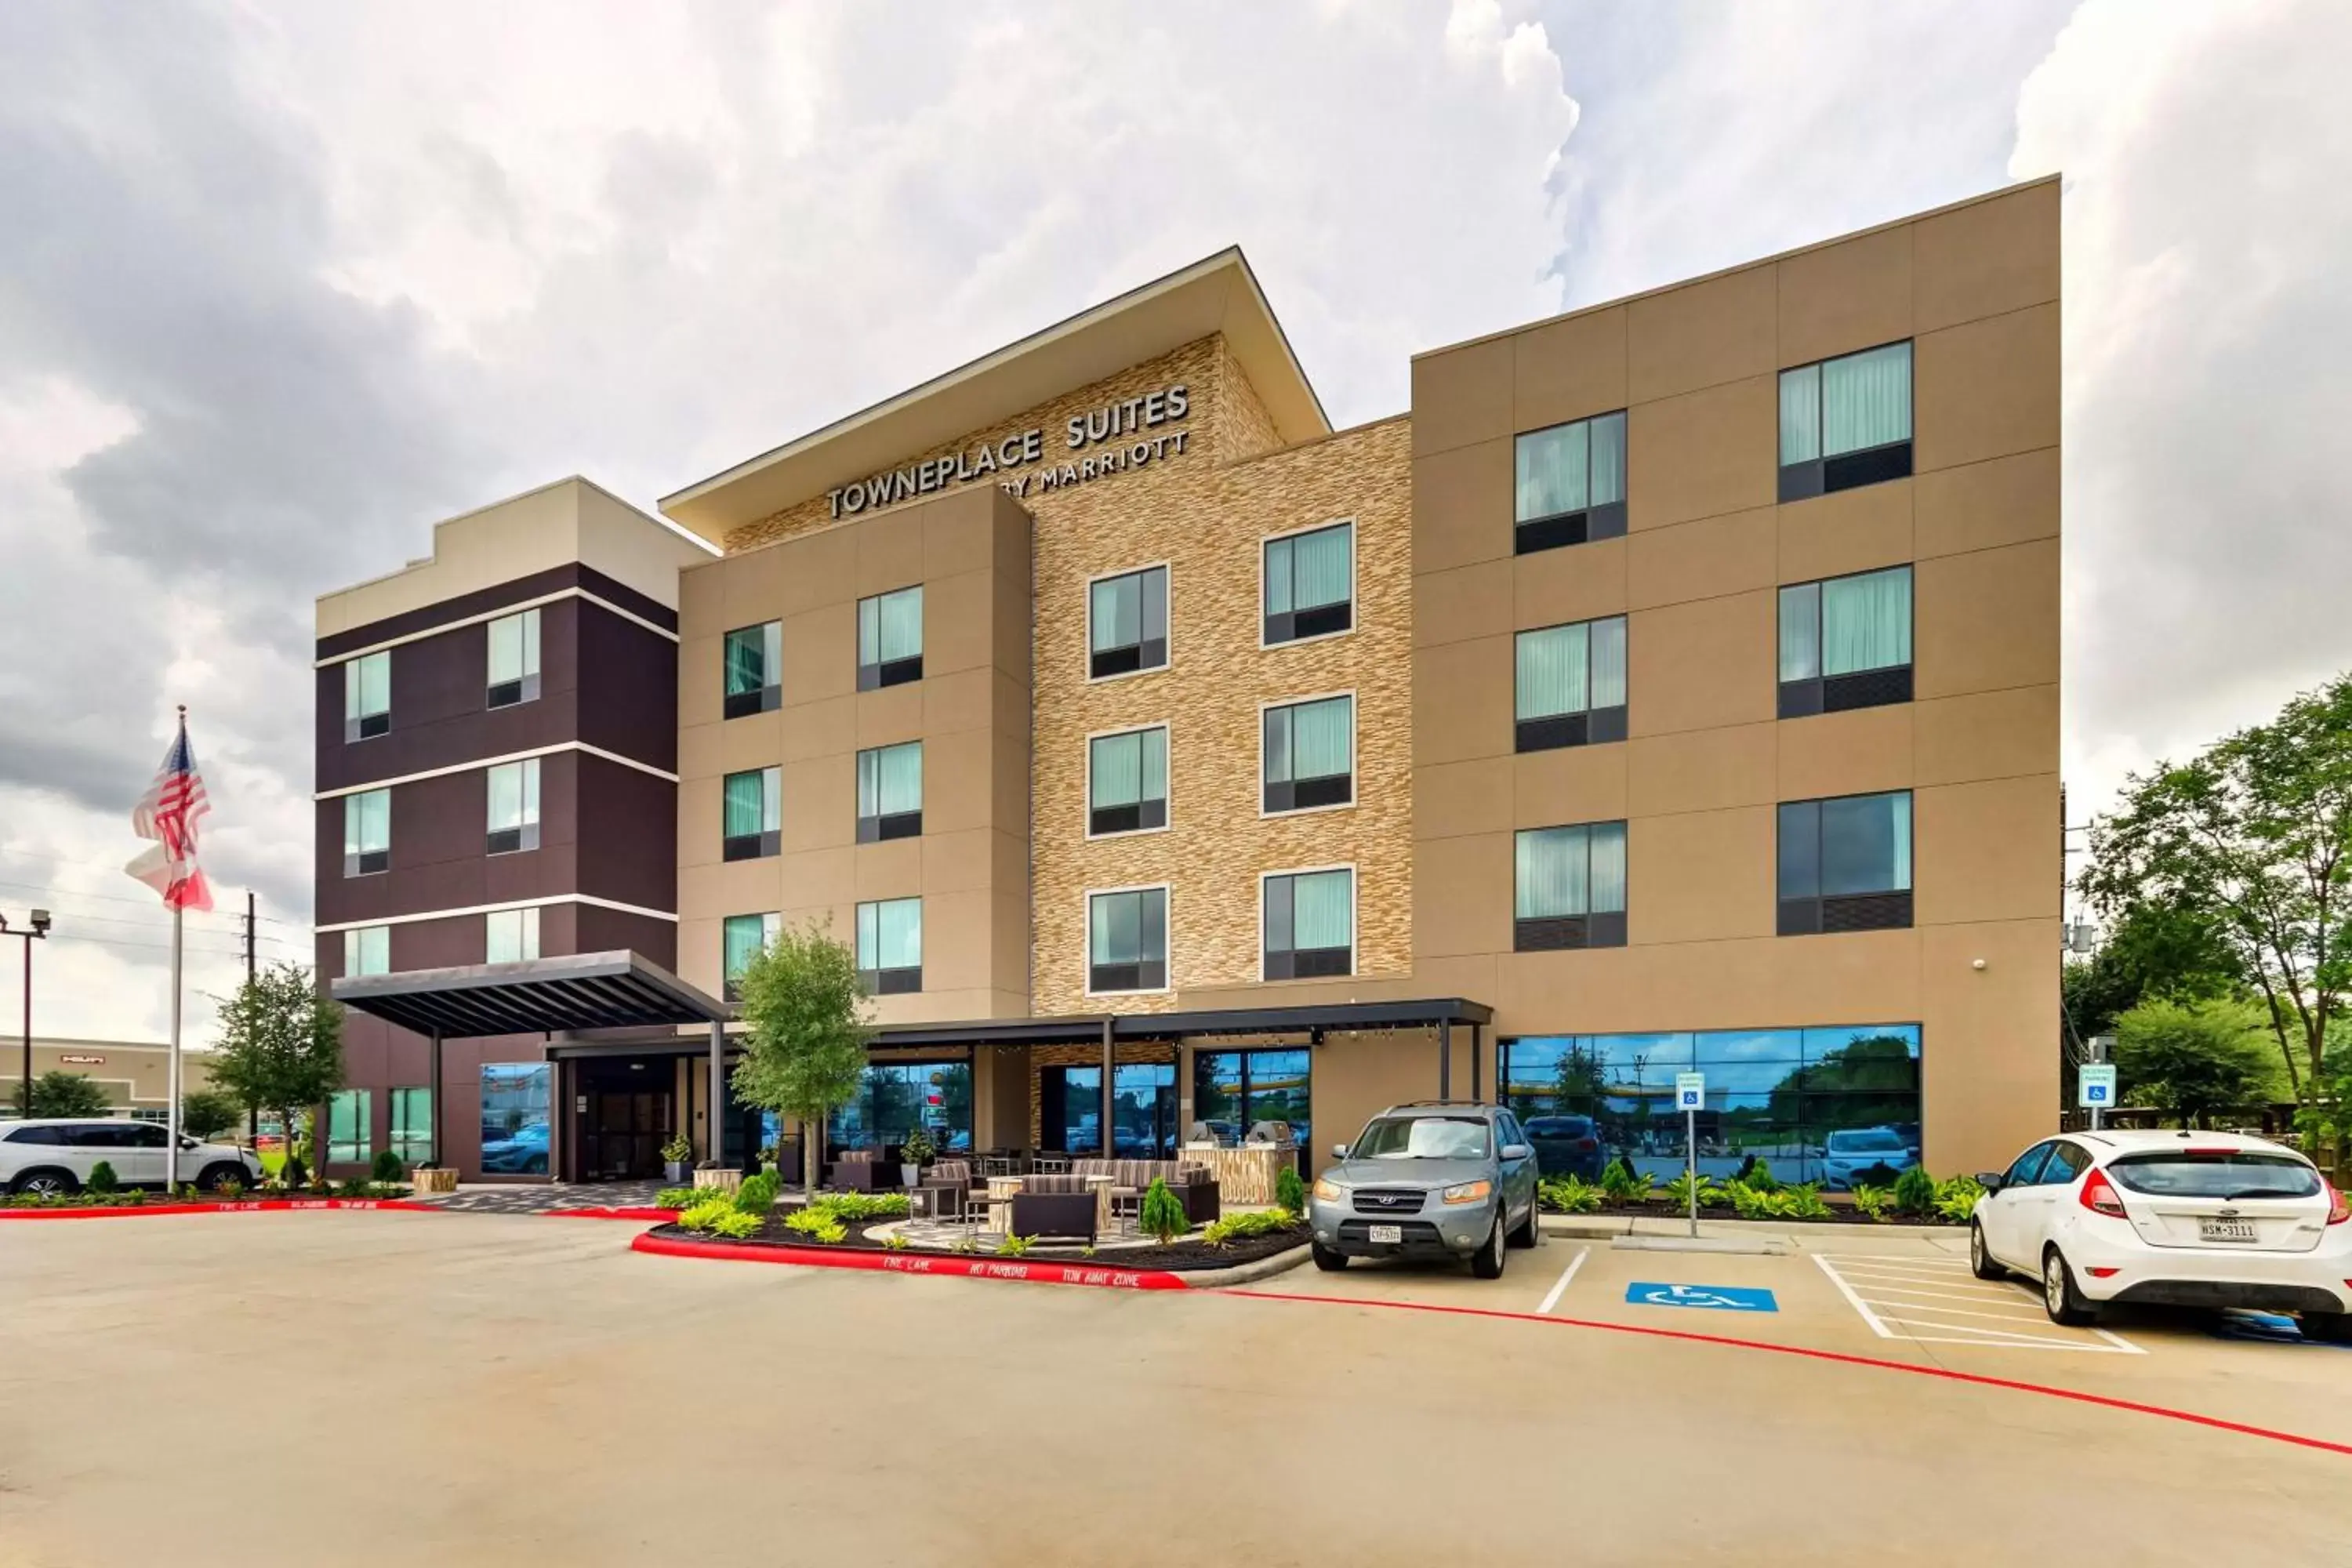 Property Building in TownePlace Suites by Marriott Houston Northwest Beltway 8